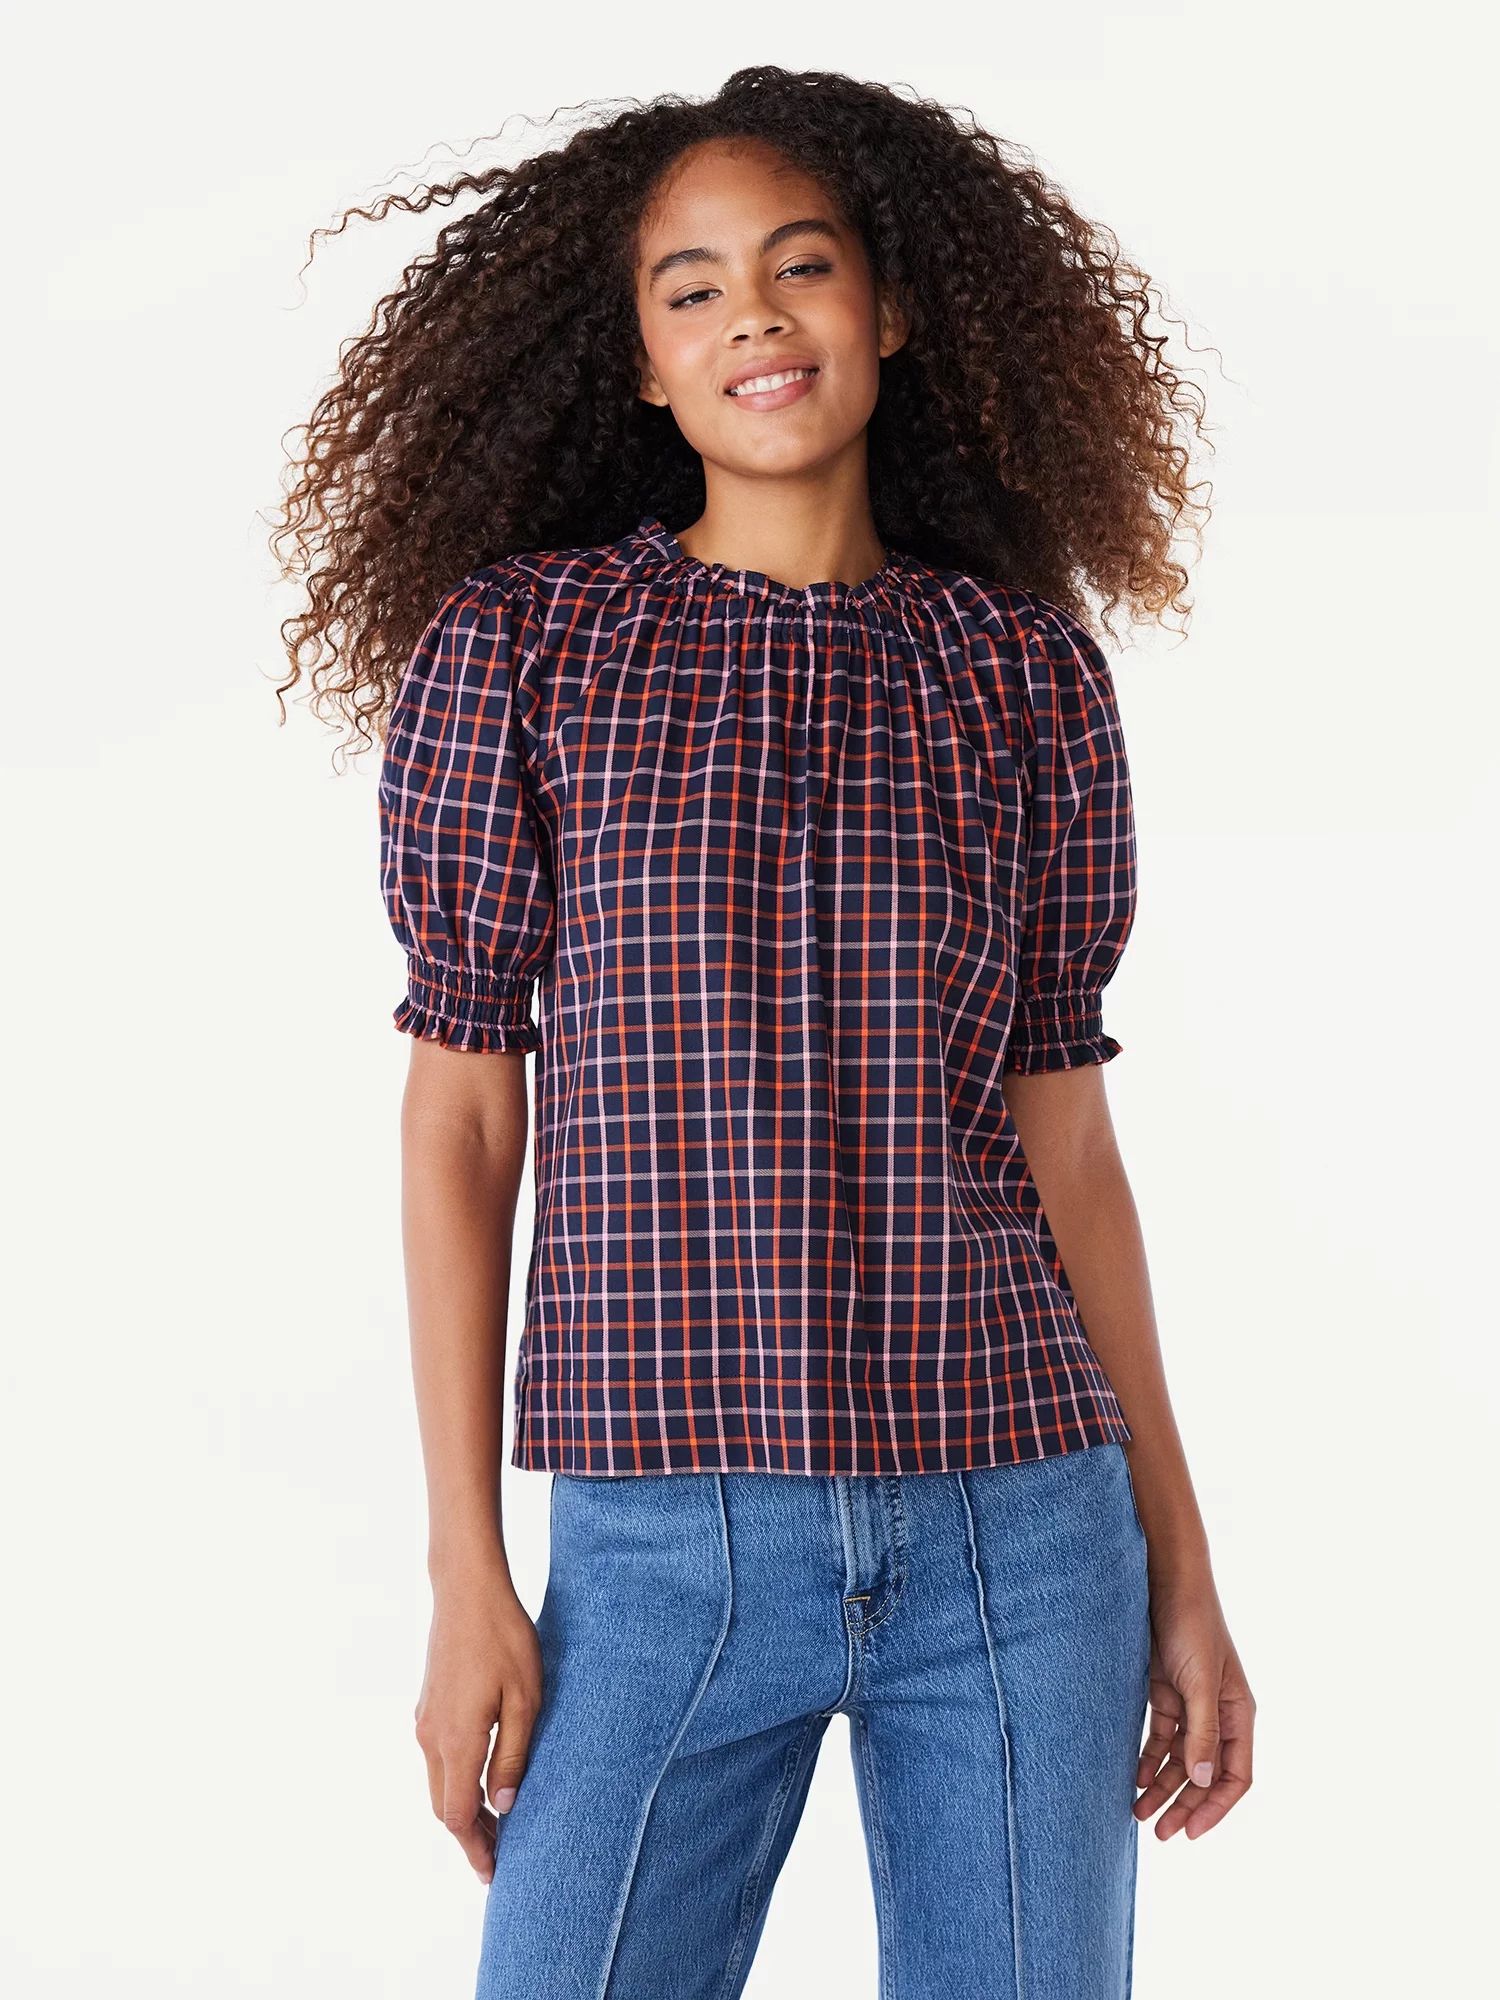 Free Assembly Women's Plaid Ruffle Neck Top with Short Puff Sleeves, Sizes XS-XXL | Walmart (US)